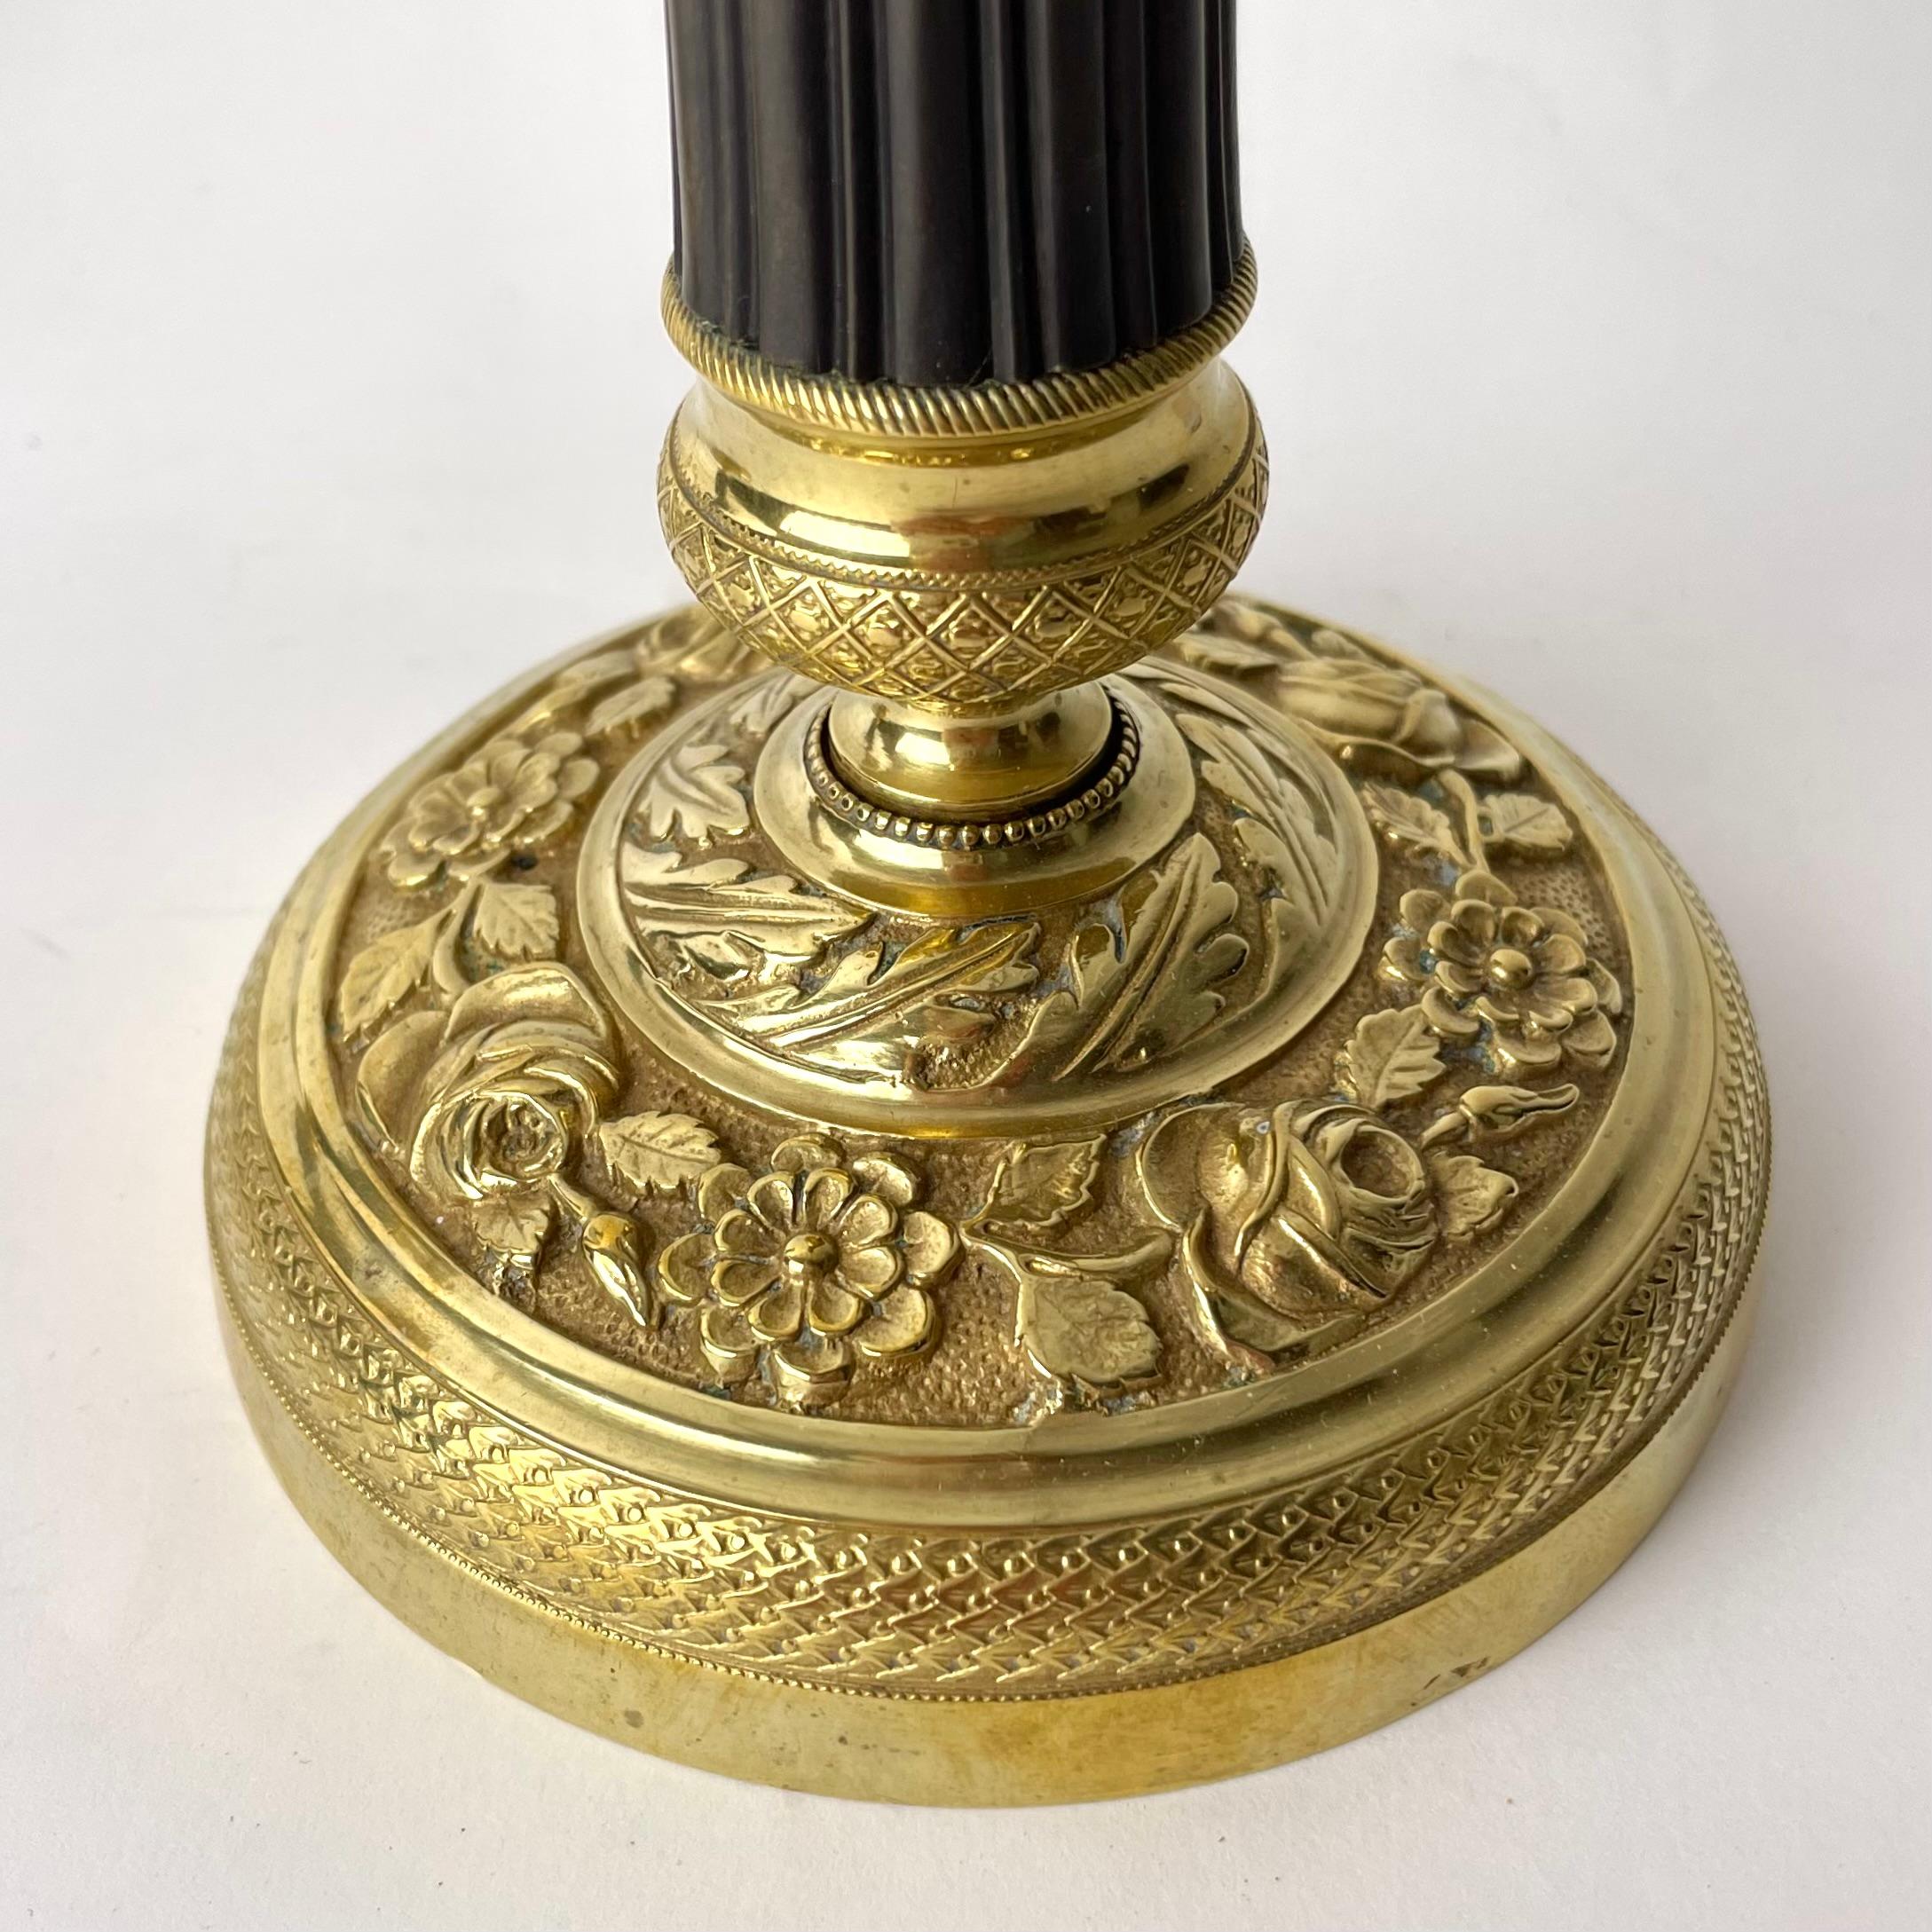 Gilt A Pair of Elegant Empire Candlesticks, Gilded and Patinated Brass, 1820s France For Sale